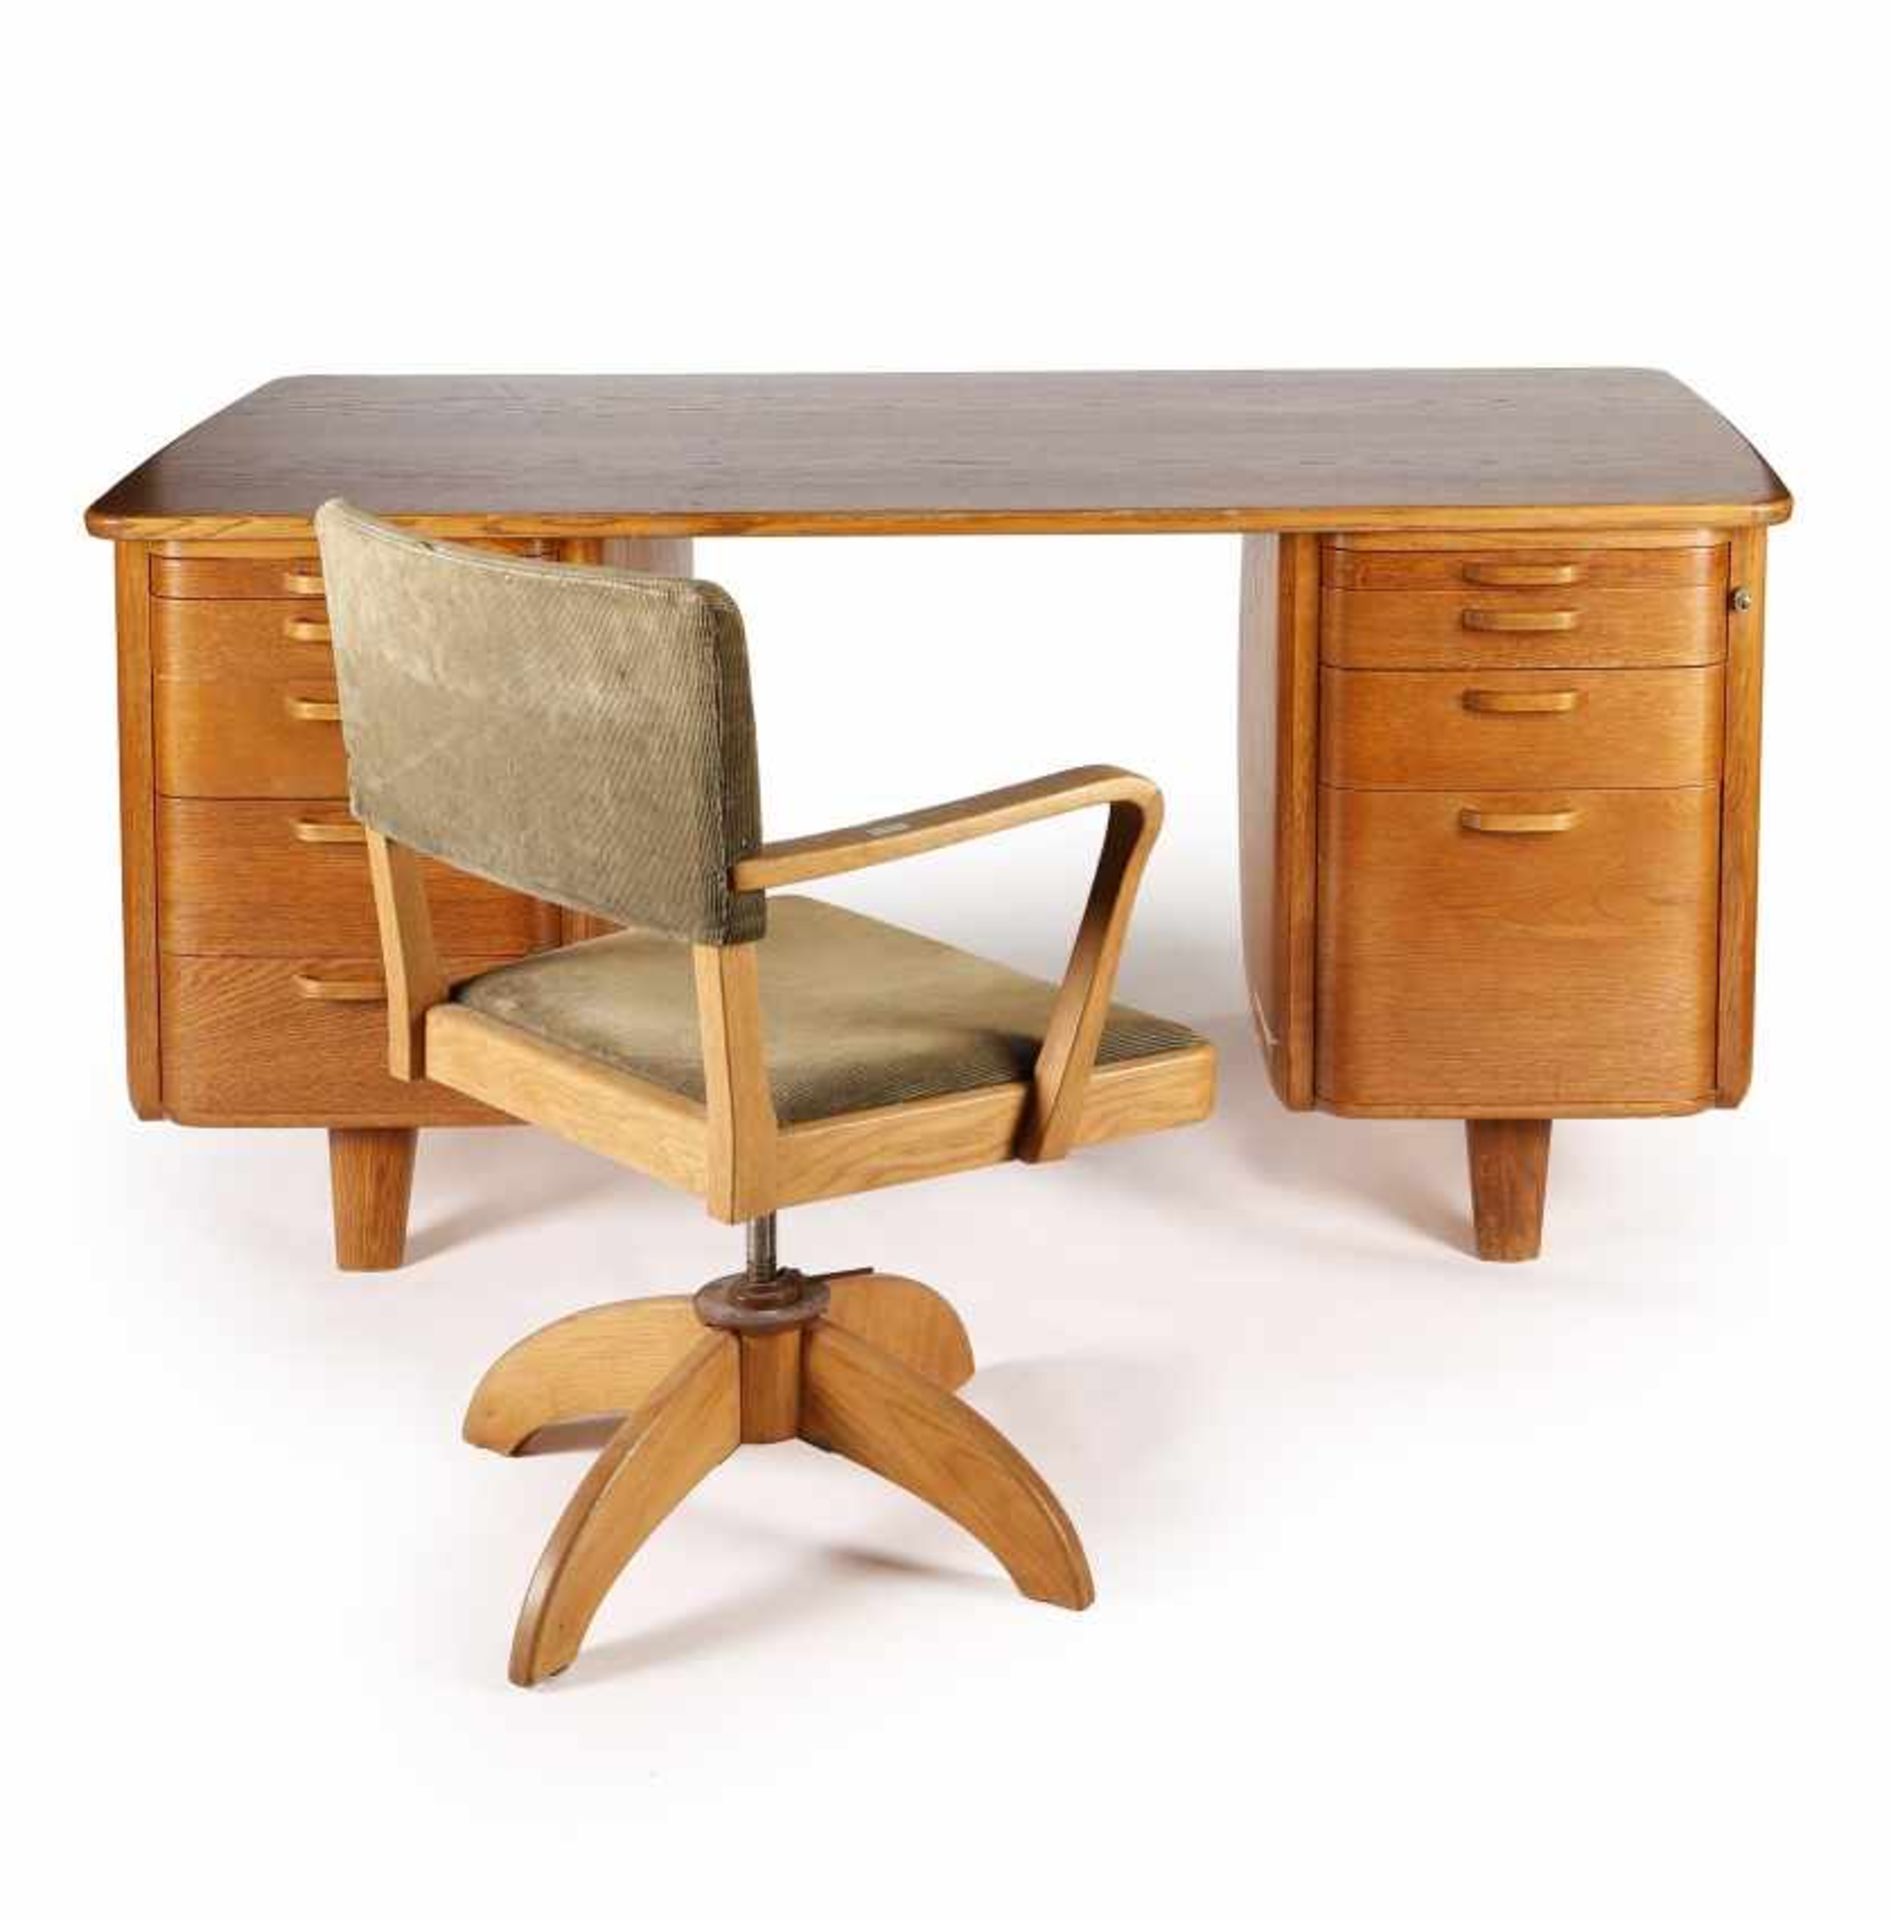 Gunnar Ericsson , Office desk with chair, Teak and chair inGunnar Ericsson Sweden, late 19th-early